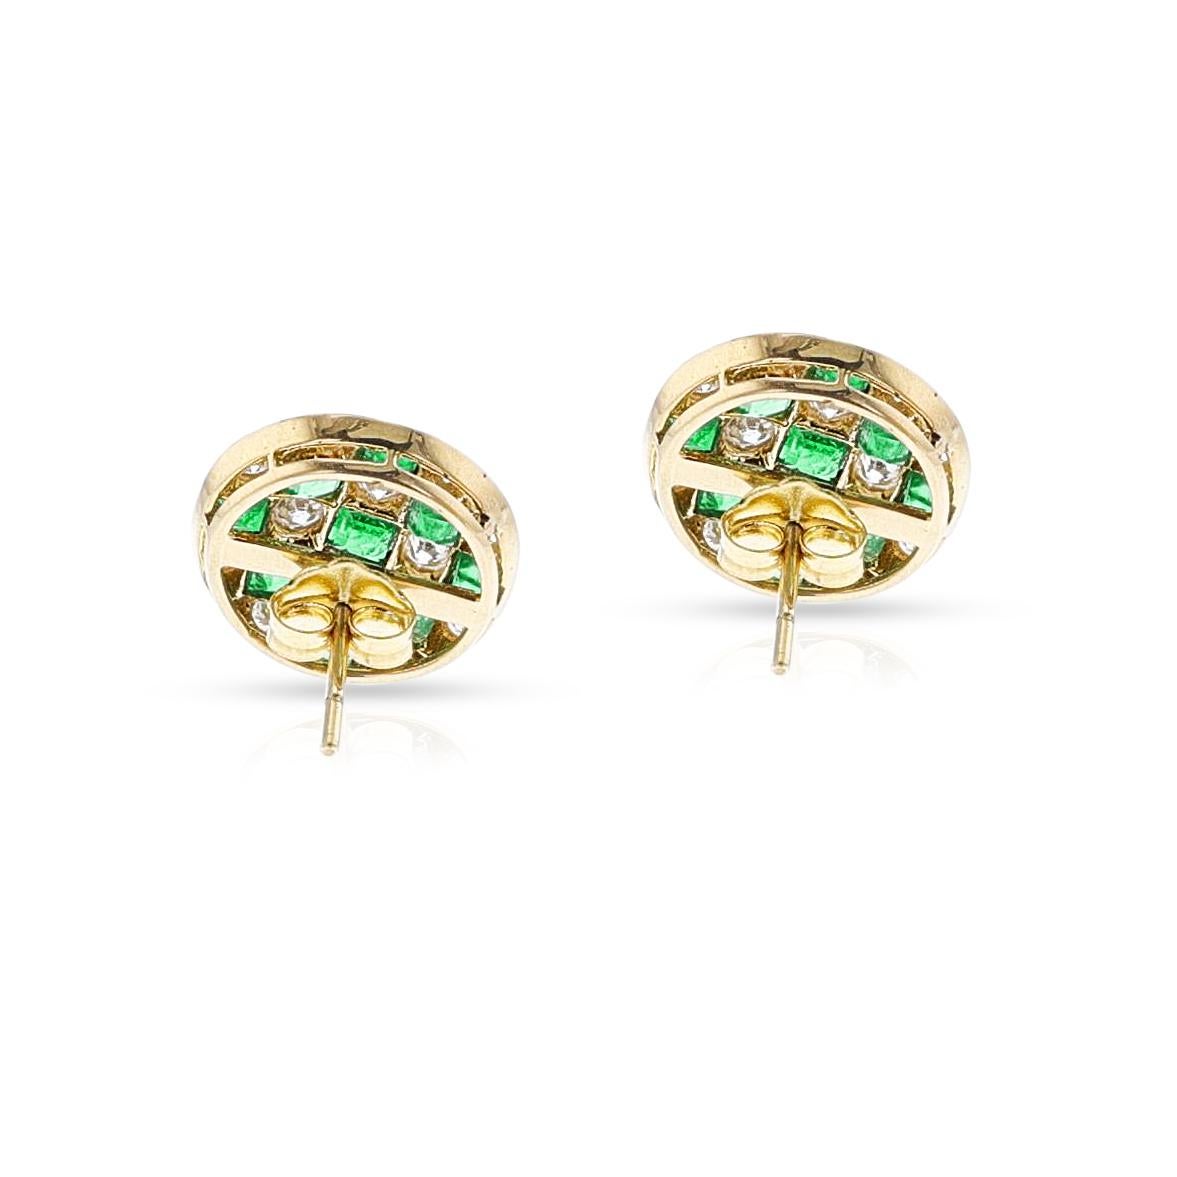 A pair of Emerald and Diamond Checkerboard Stud Earrings made in 18k Yellow Gold. The length is 0.50